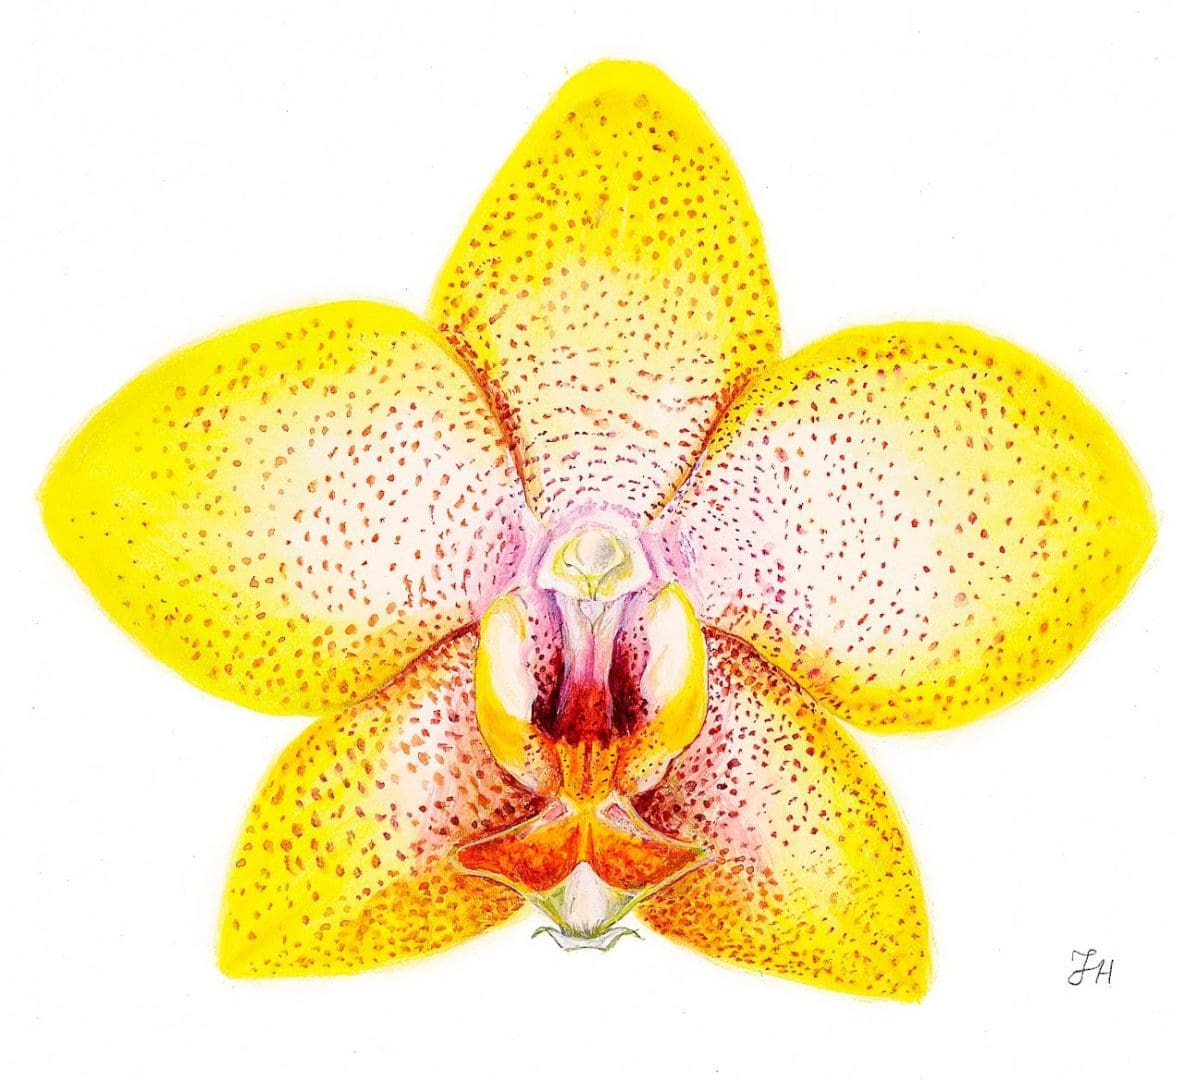 Orchid's at The Folk! on Saturday 13th May 2023 - 10am to 4pm.